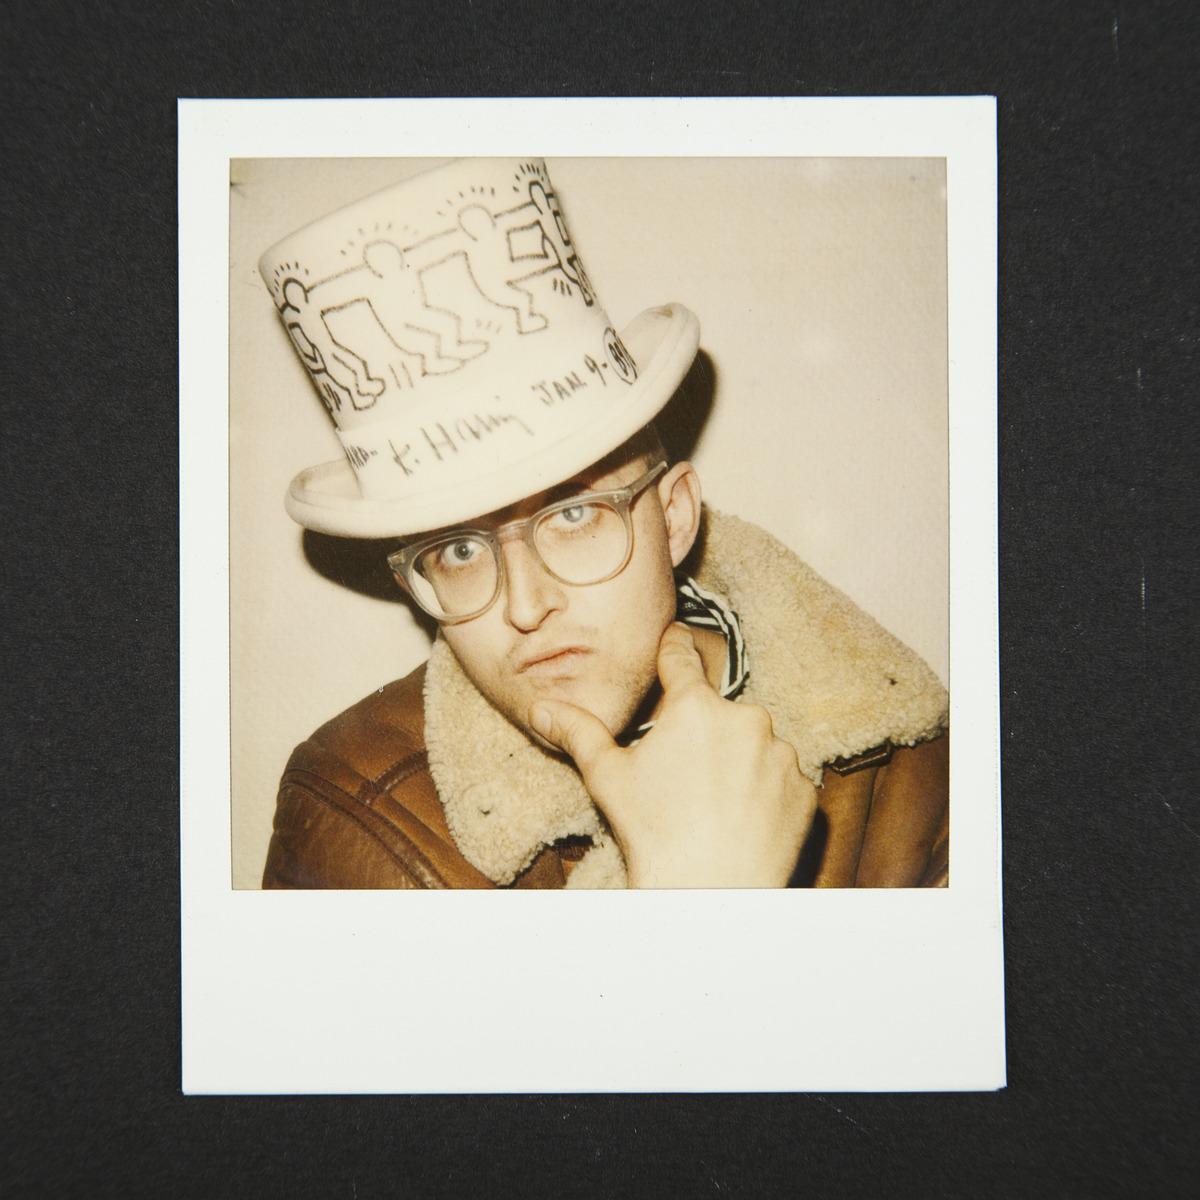 Five things you may not know about Keith Haring